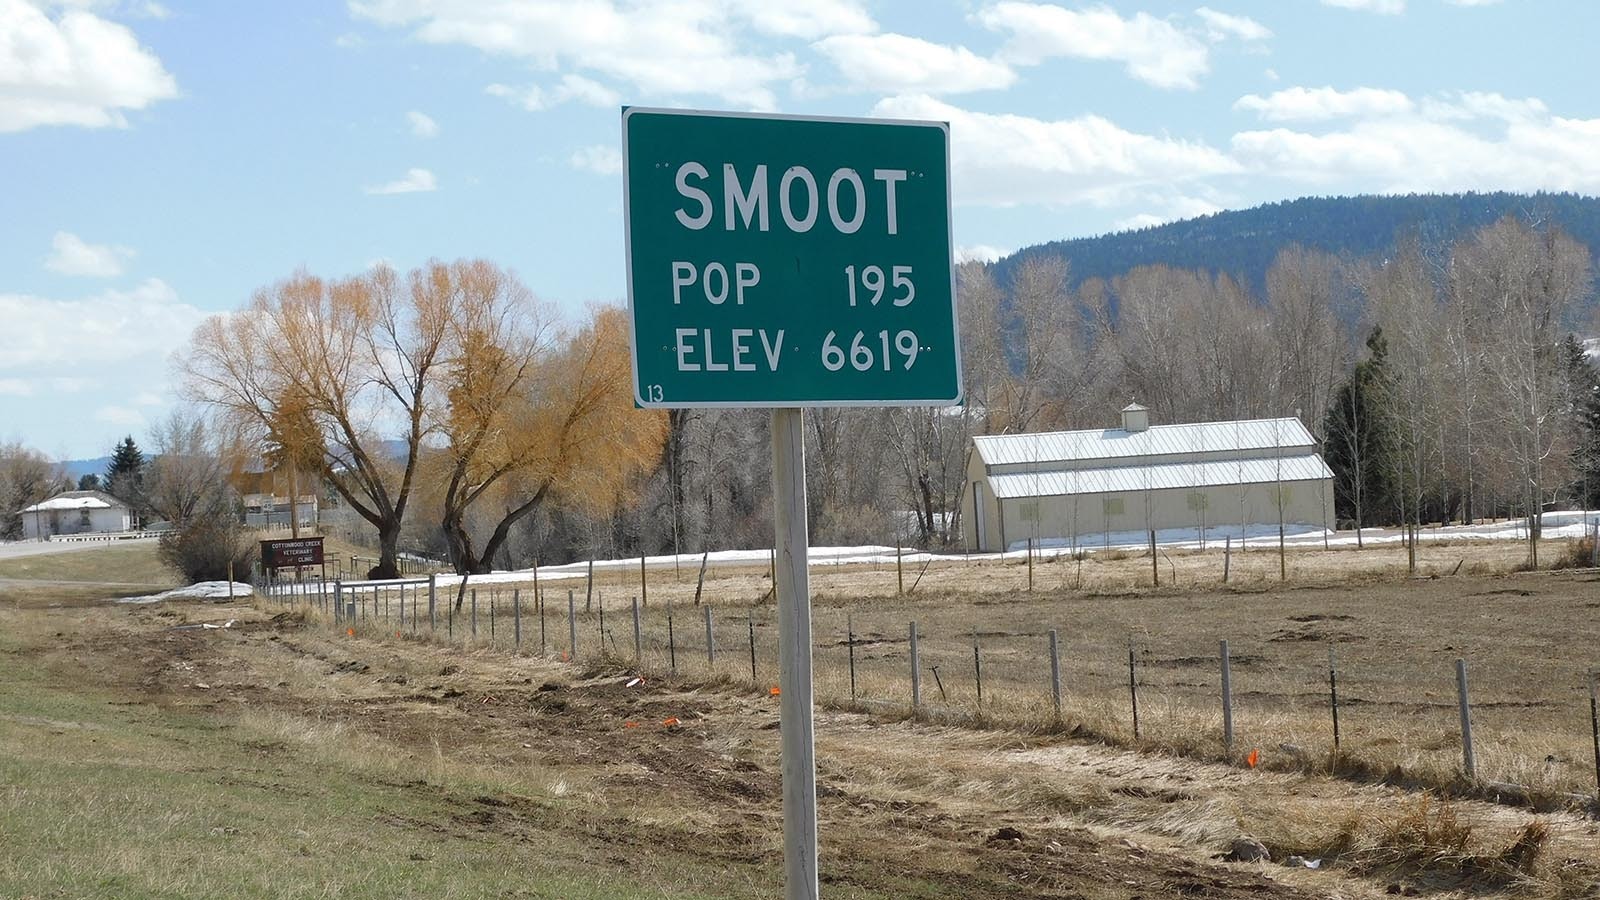 Smoot, Wyoming, is a tiny community in Wyoming's Star Valley just south of Afton.